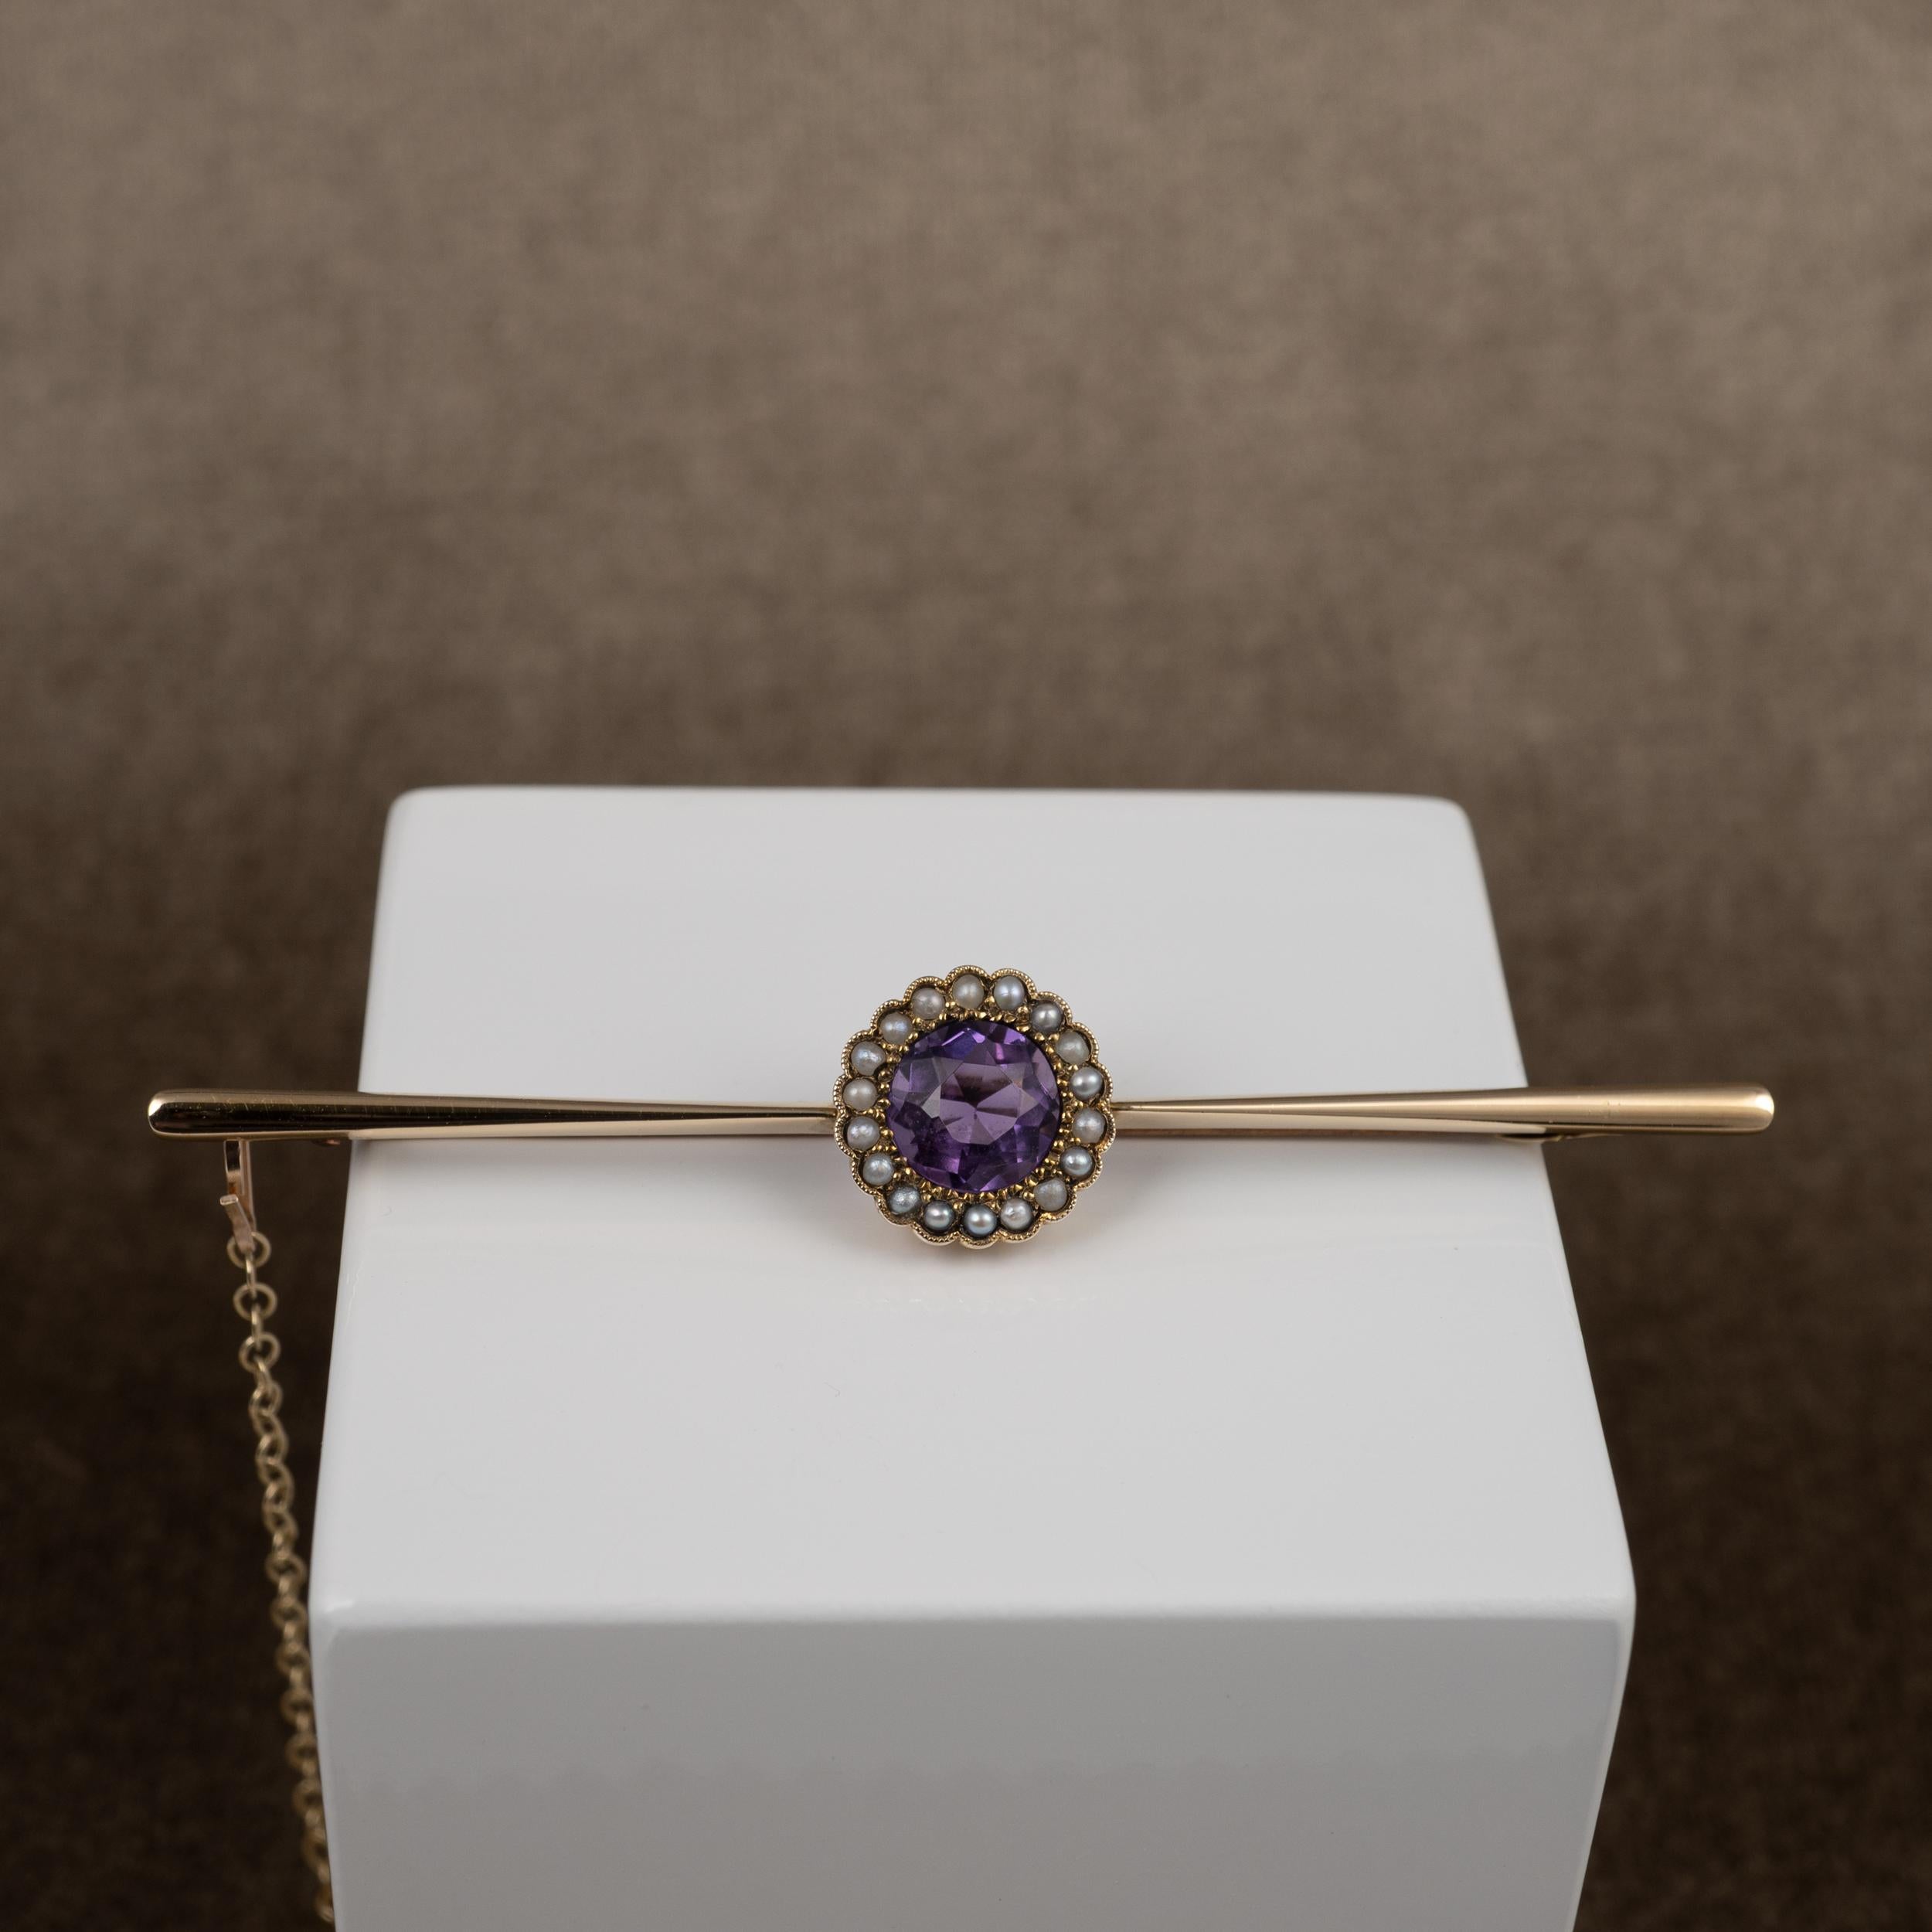 This elegant ladies antique brooch features a central setting consisting of a round cut amethyst with a surround of pearls.

The long brooch pin displays a central round facet cut amethyst which has a translucent but rich lilac purple colour. The